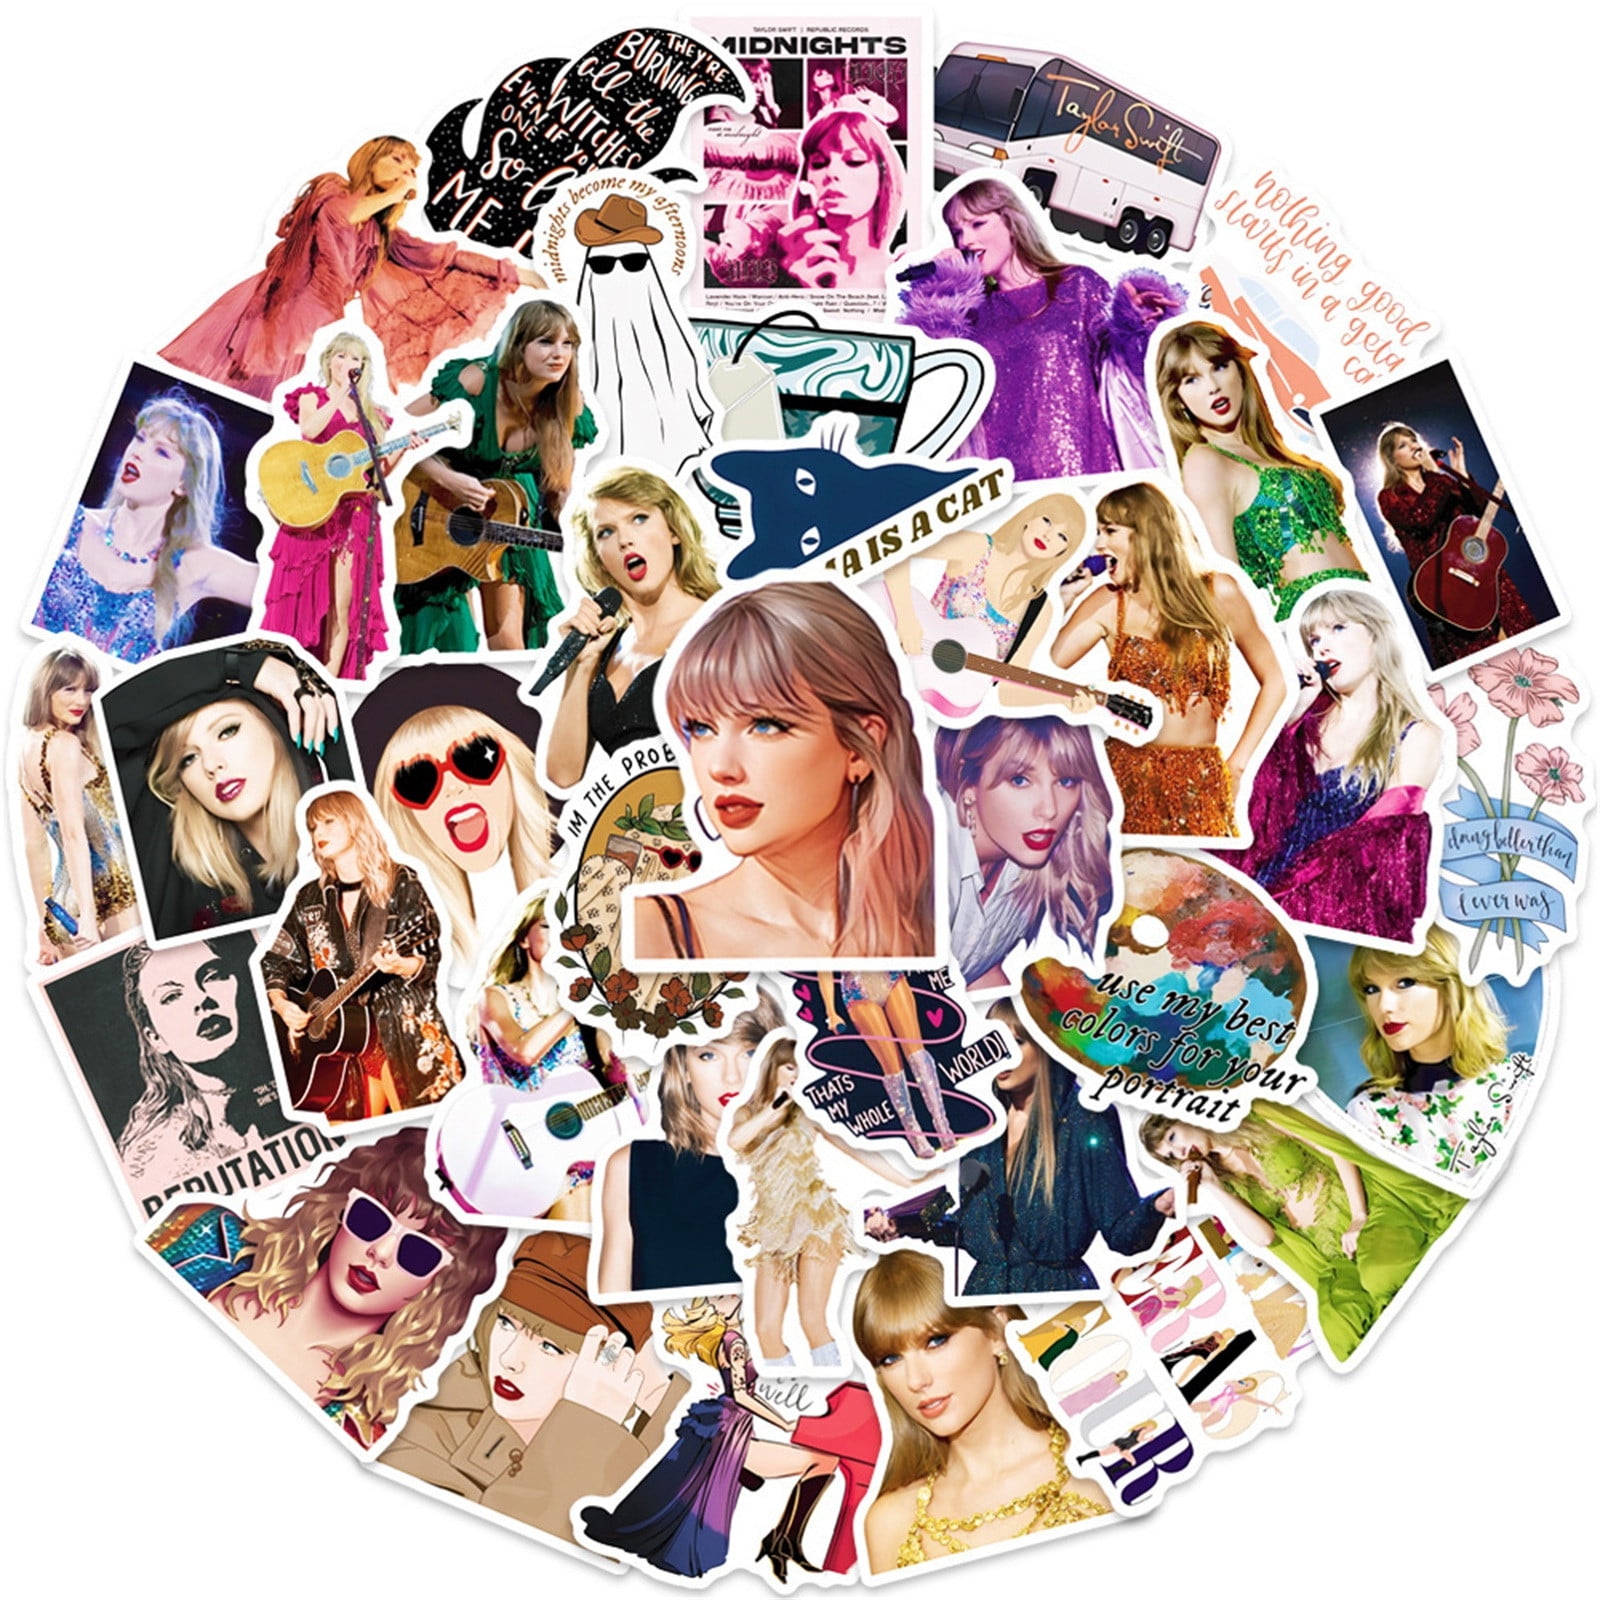 JCQAYB 100pcs Singer Taylor Sticker for Women,Popular Singer Taylor Ablum  Stickers for Adult,Vinyl Waterproof Folklore Music Stickers for Water